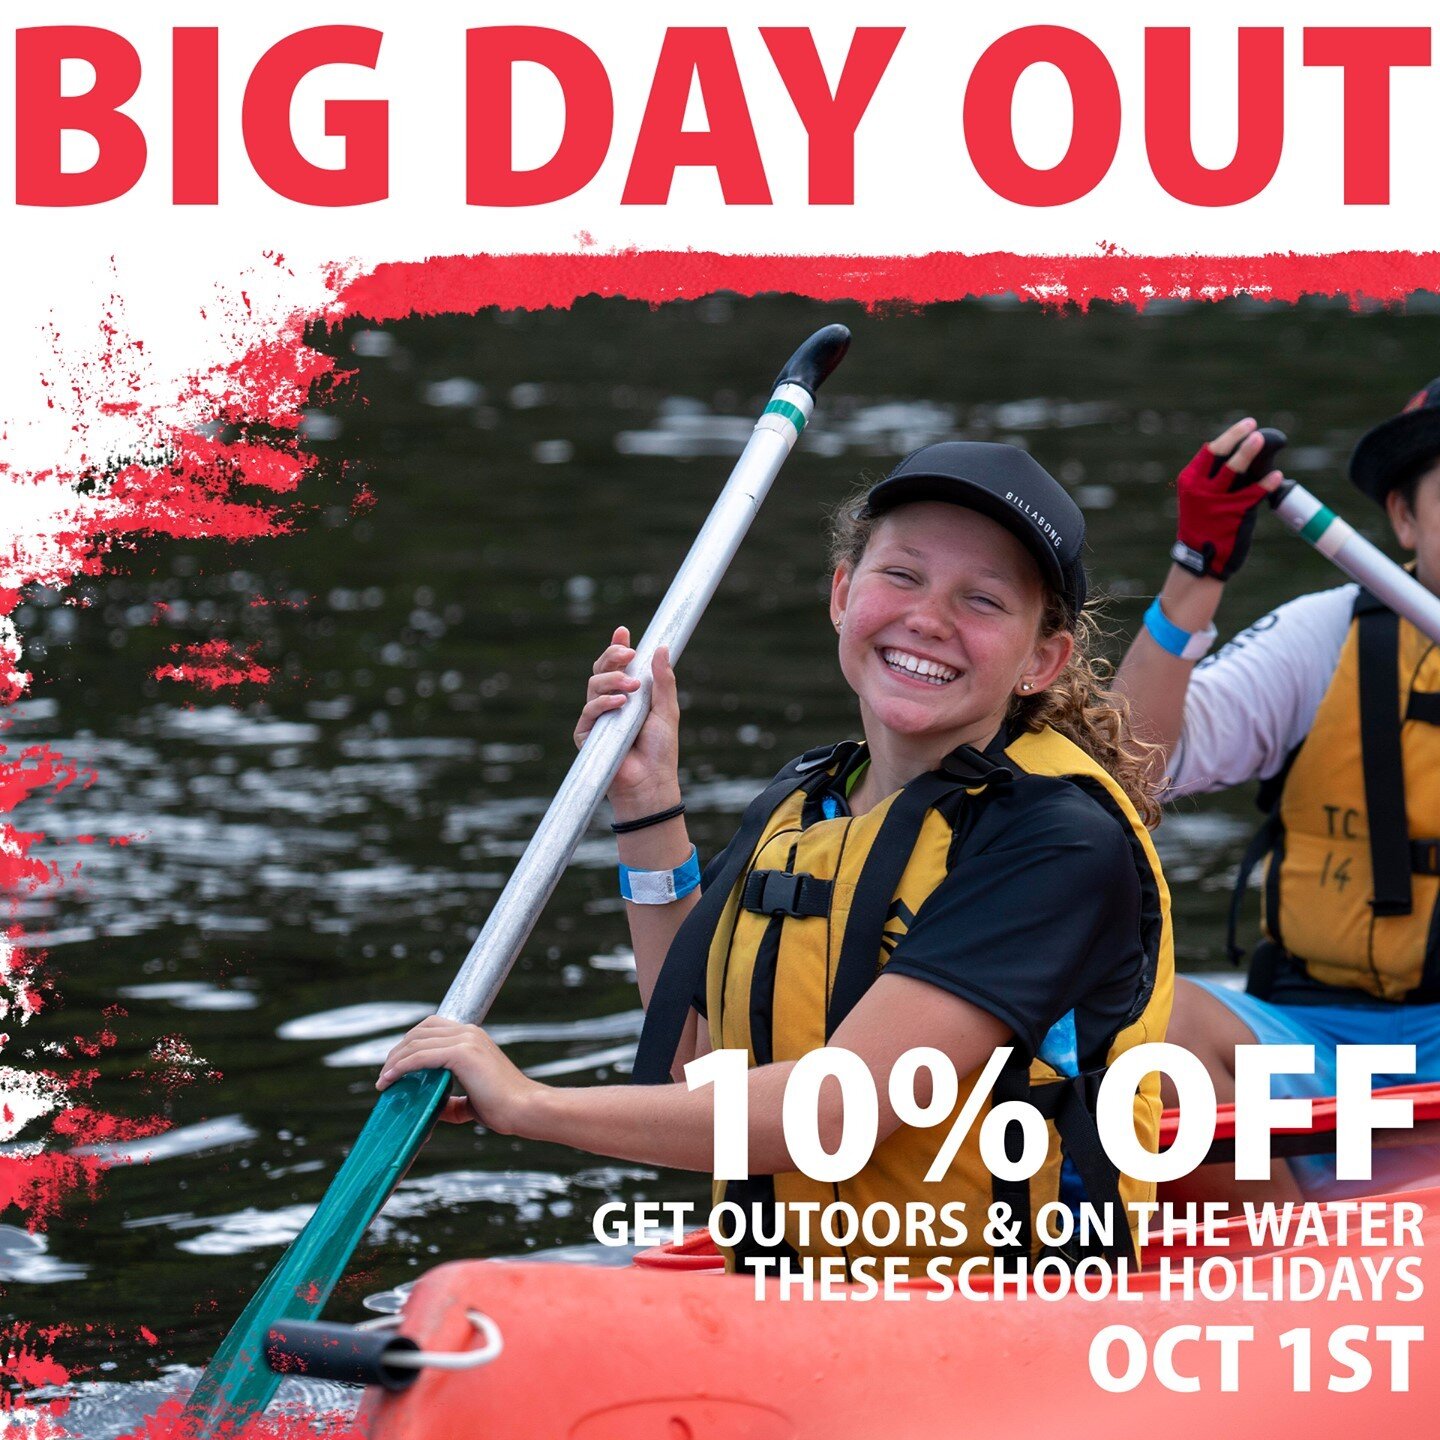 We have amazing day adventures for your son or daughter in the first week of the school holidays. Our Big day out is an opportunity to spend a whole day Canoeing, Hiking and Abseiling in the Australian Wilderness. Use the discount code YWCOEBDO for 1